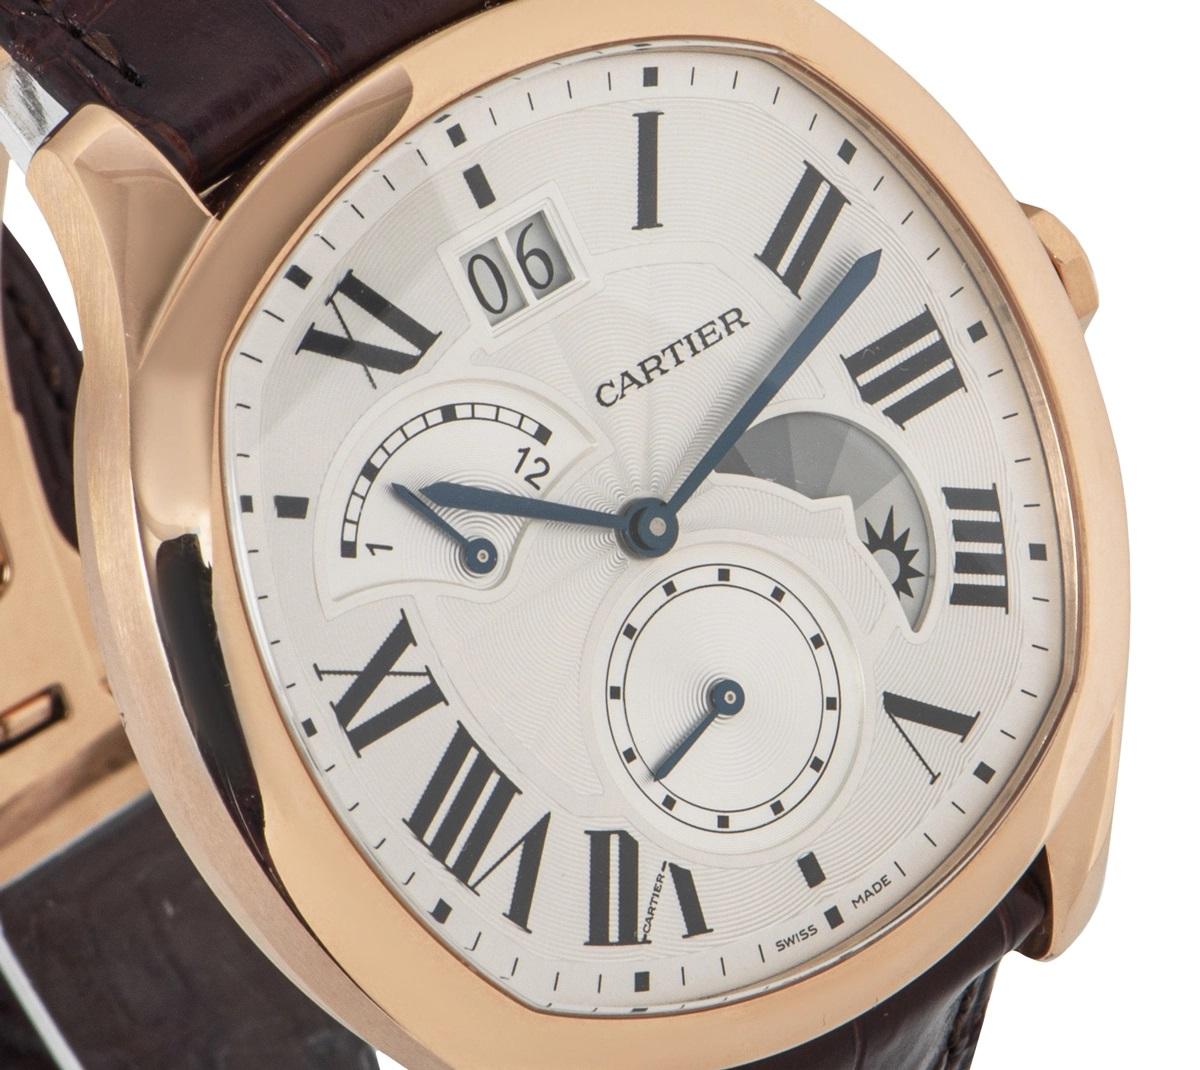 Cartier Drive De Cartier Rose Gold Watch WGN0005 In Excellent Condition For Sale In London, GB